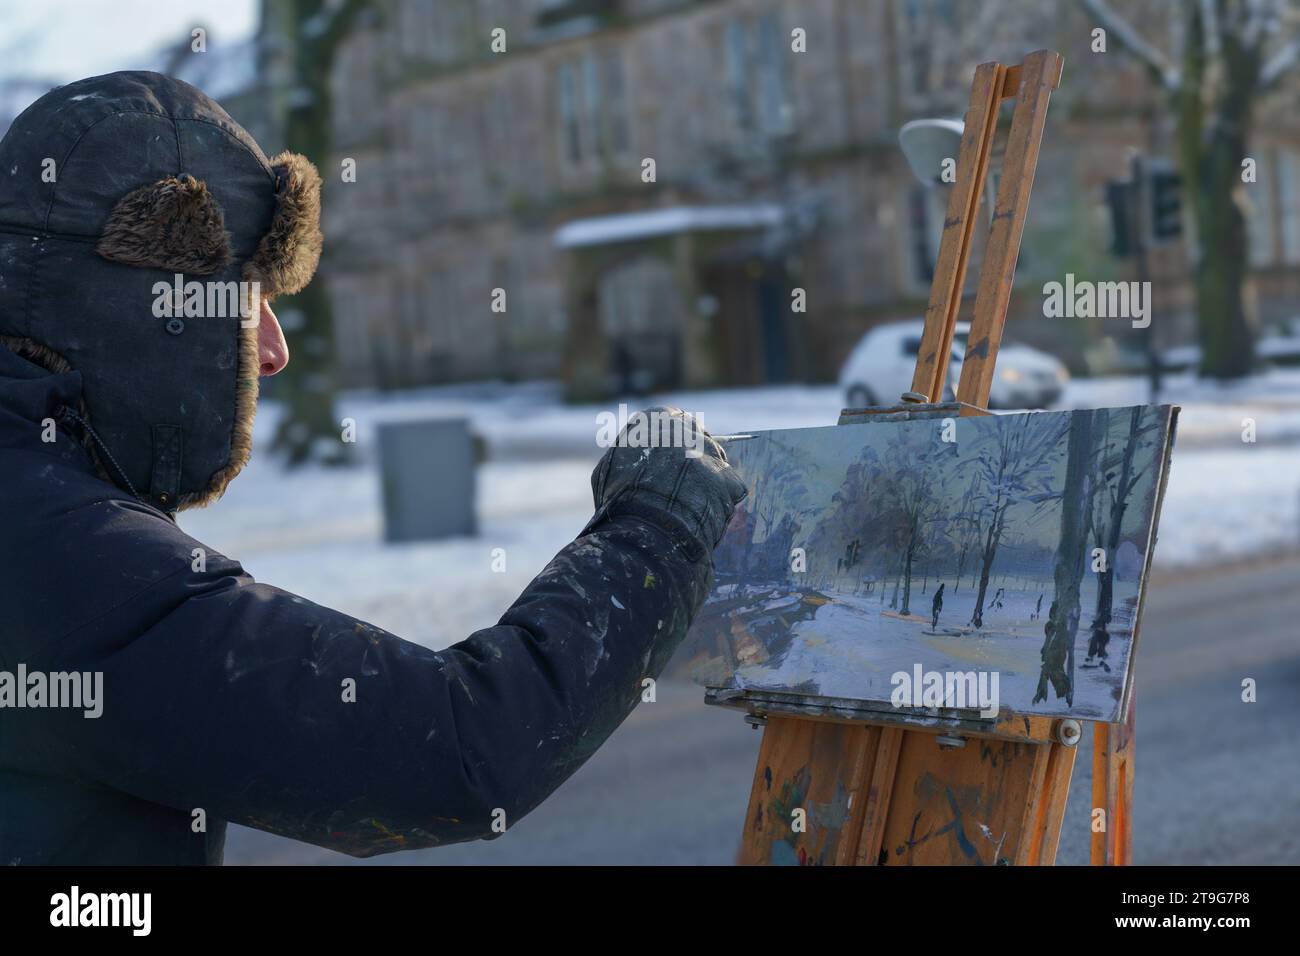 An artist using a wooden easel to support a canvas while he paints a scene of an urban winter landscape, Harrogate,Yorkshire, UK. Stock Photo